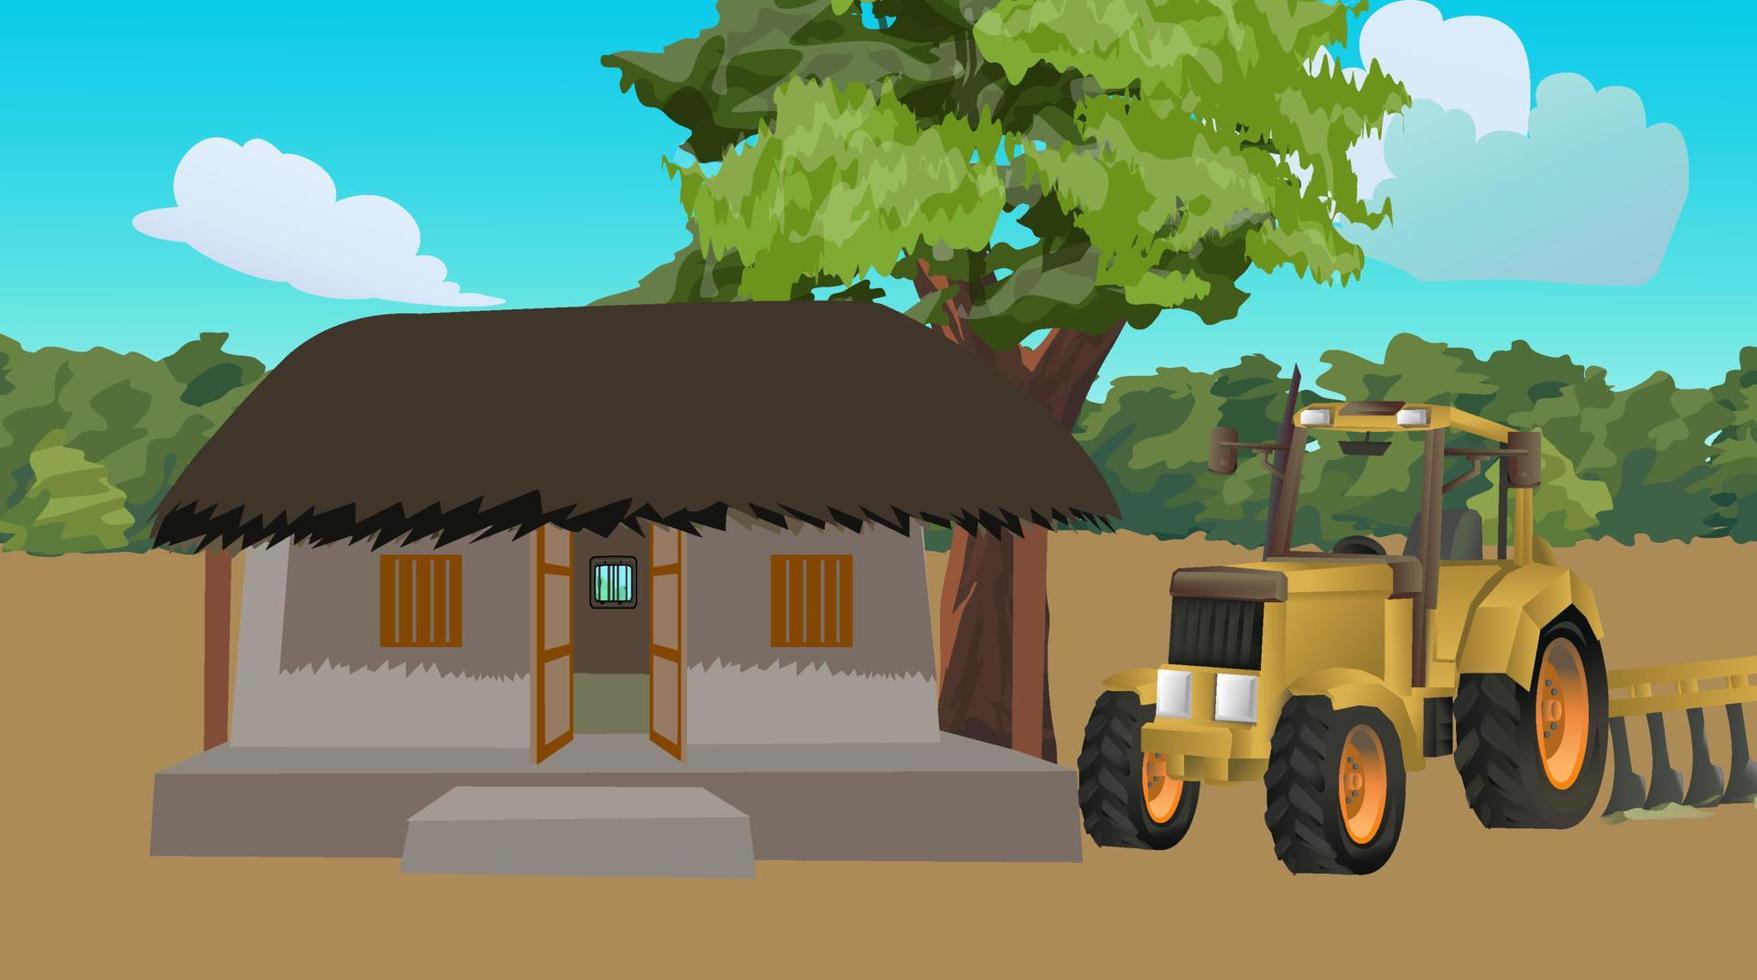 Poor house indian for cartoon animation. vector